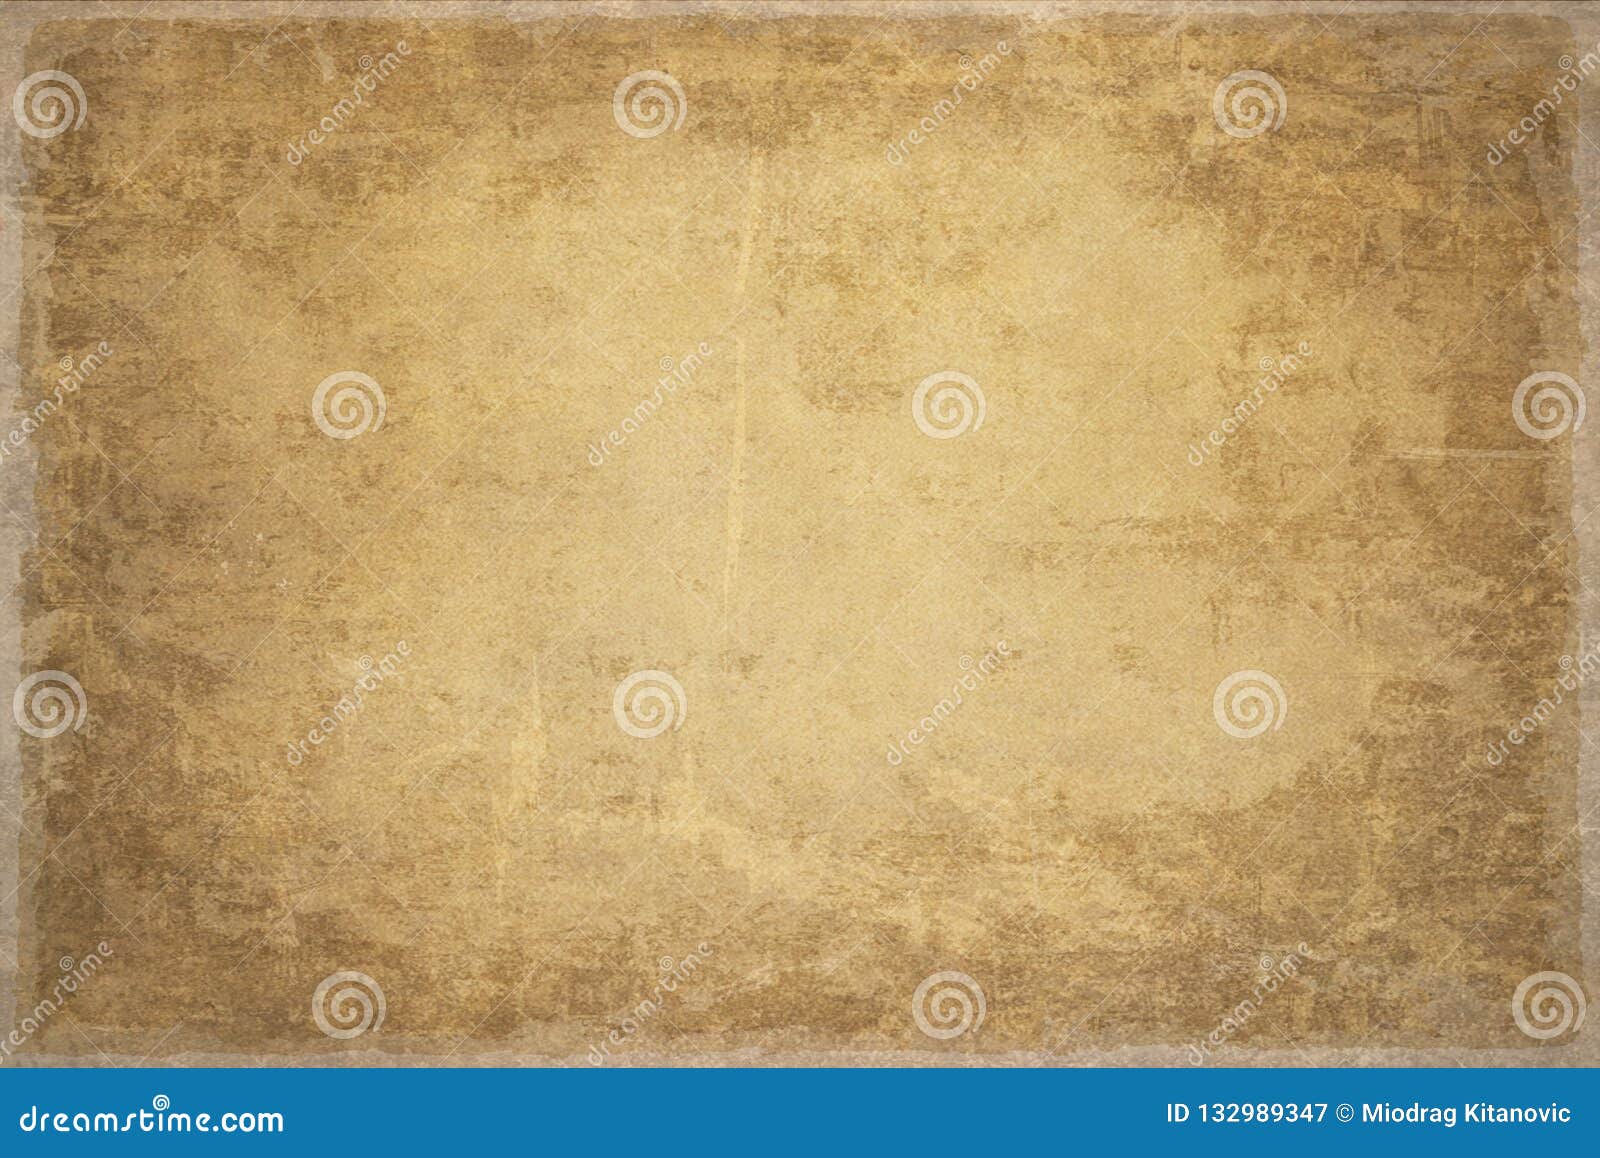 old grunge textures backgrounds with space for text